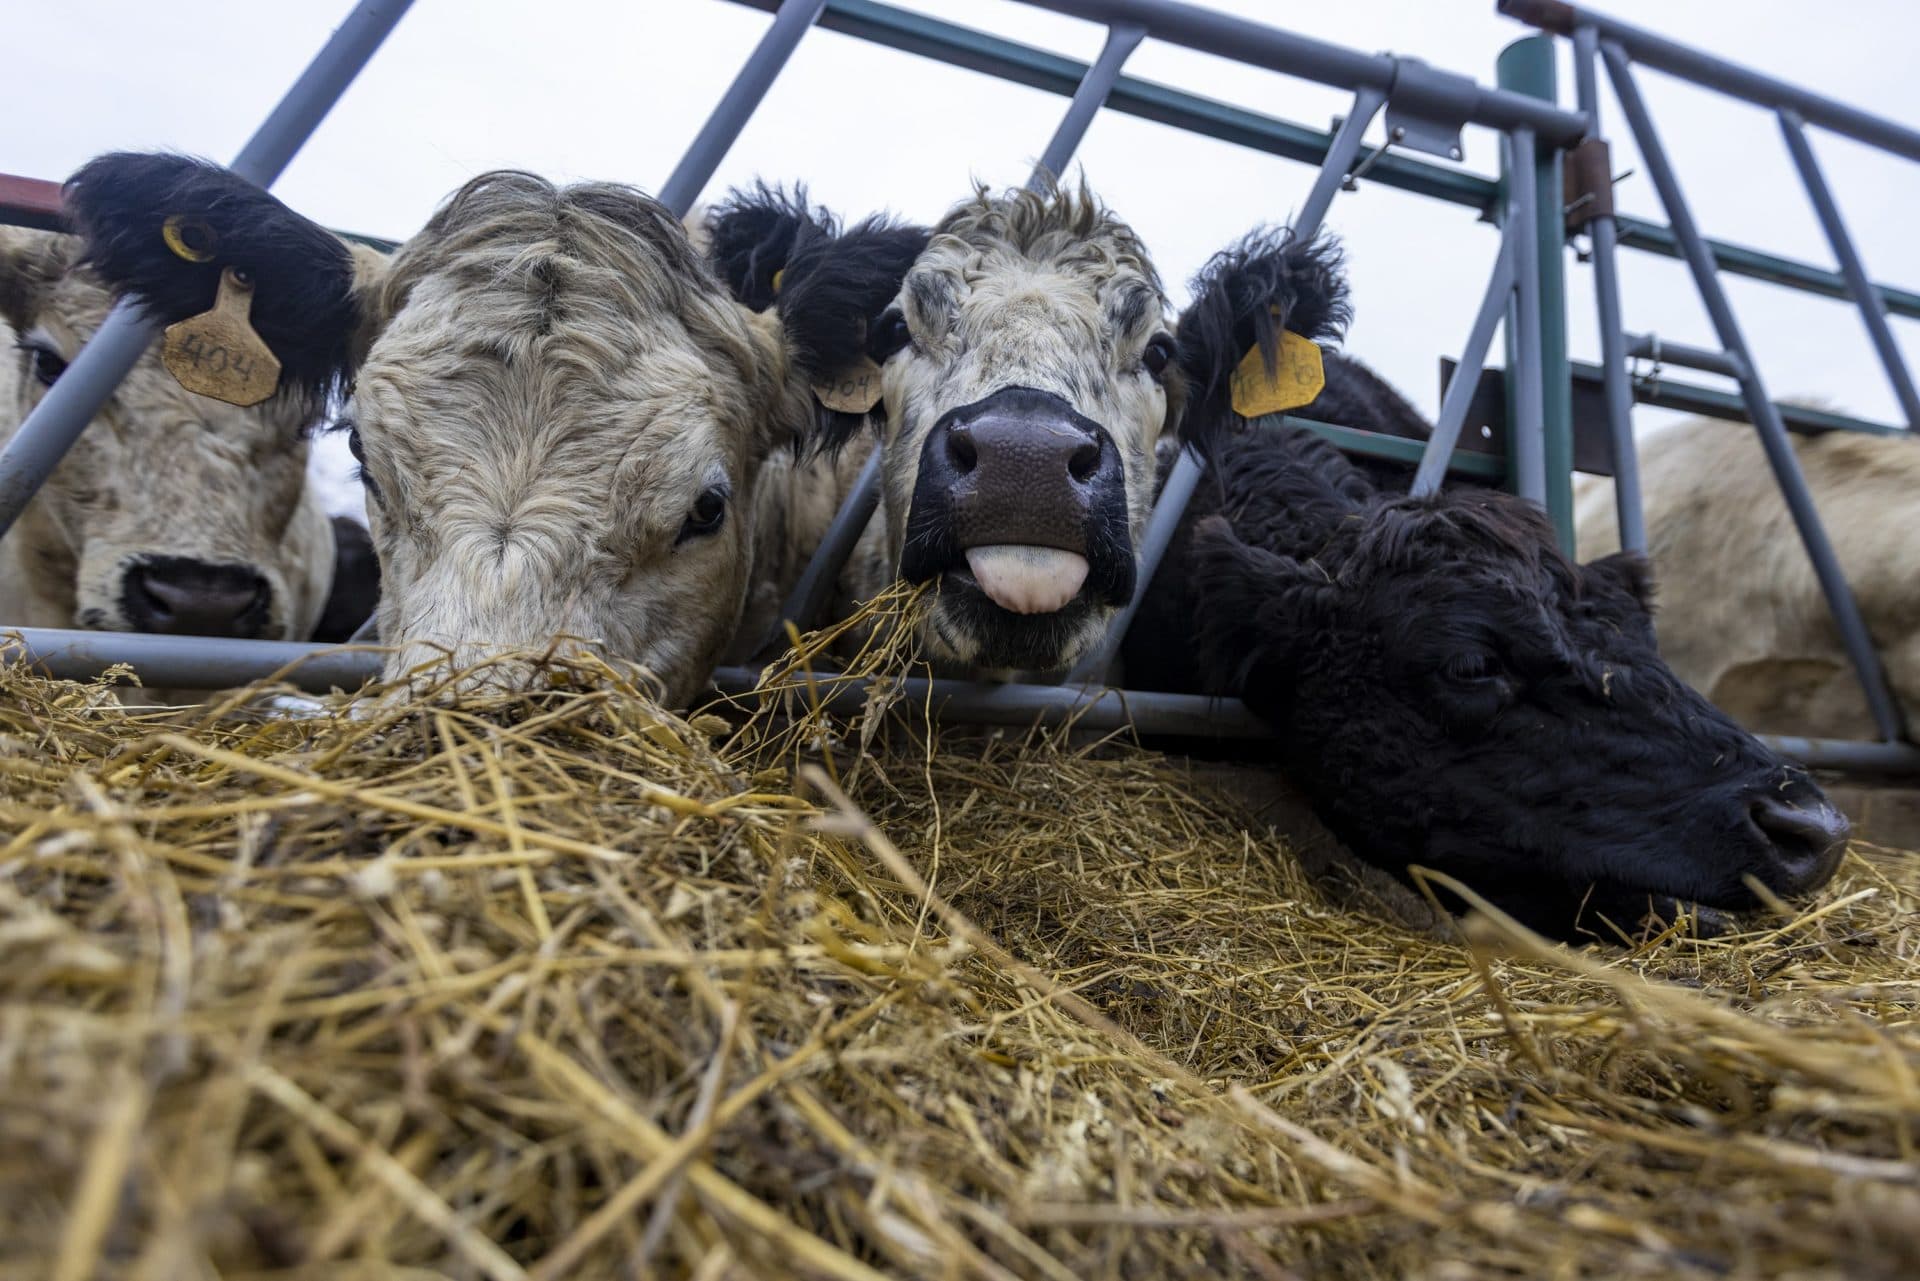 Pregnant cows feed on hay at Appleton Farms in Ipswich. (Jesse Costa/WBUR)